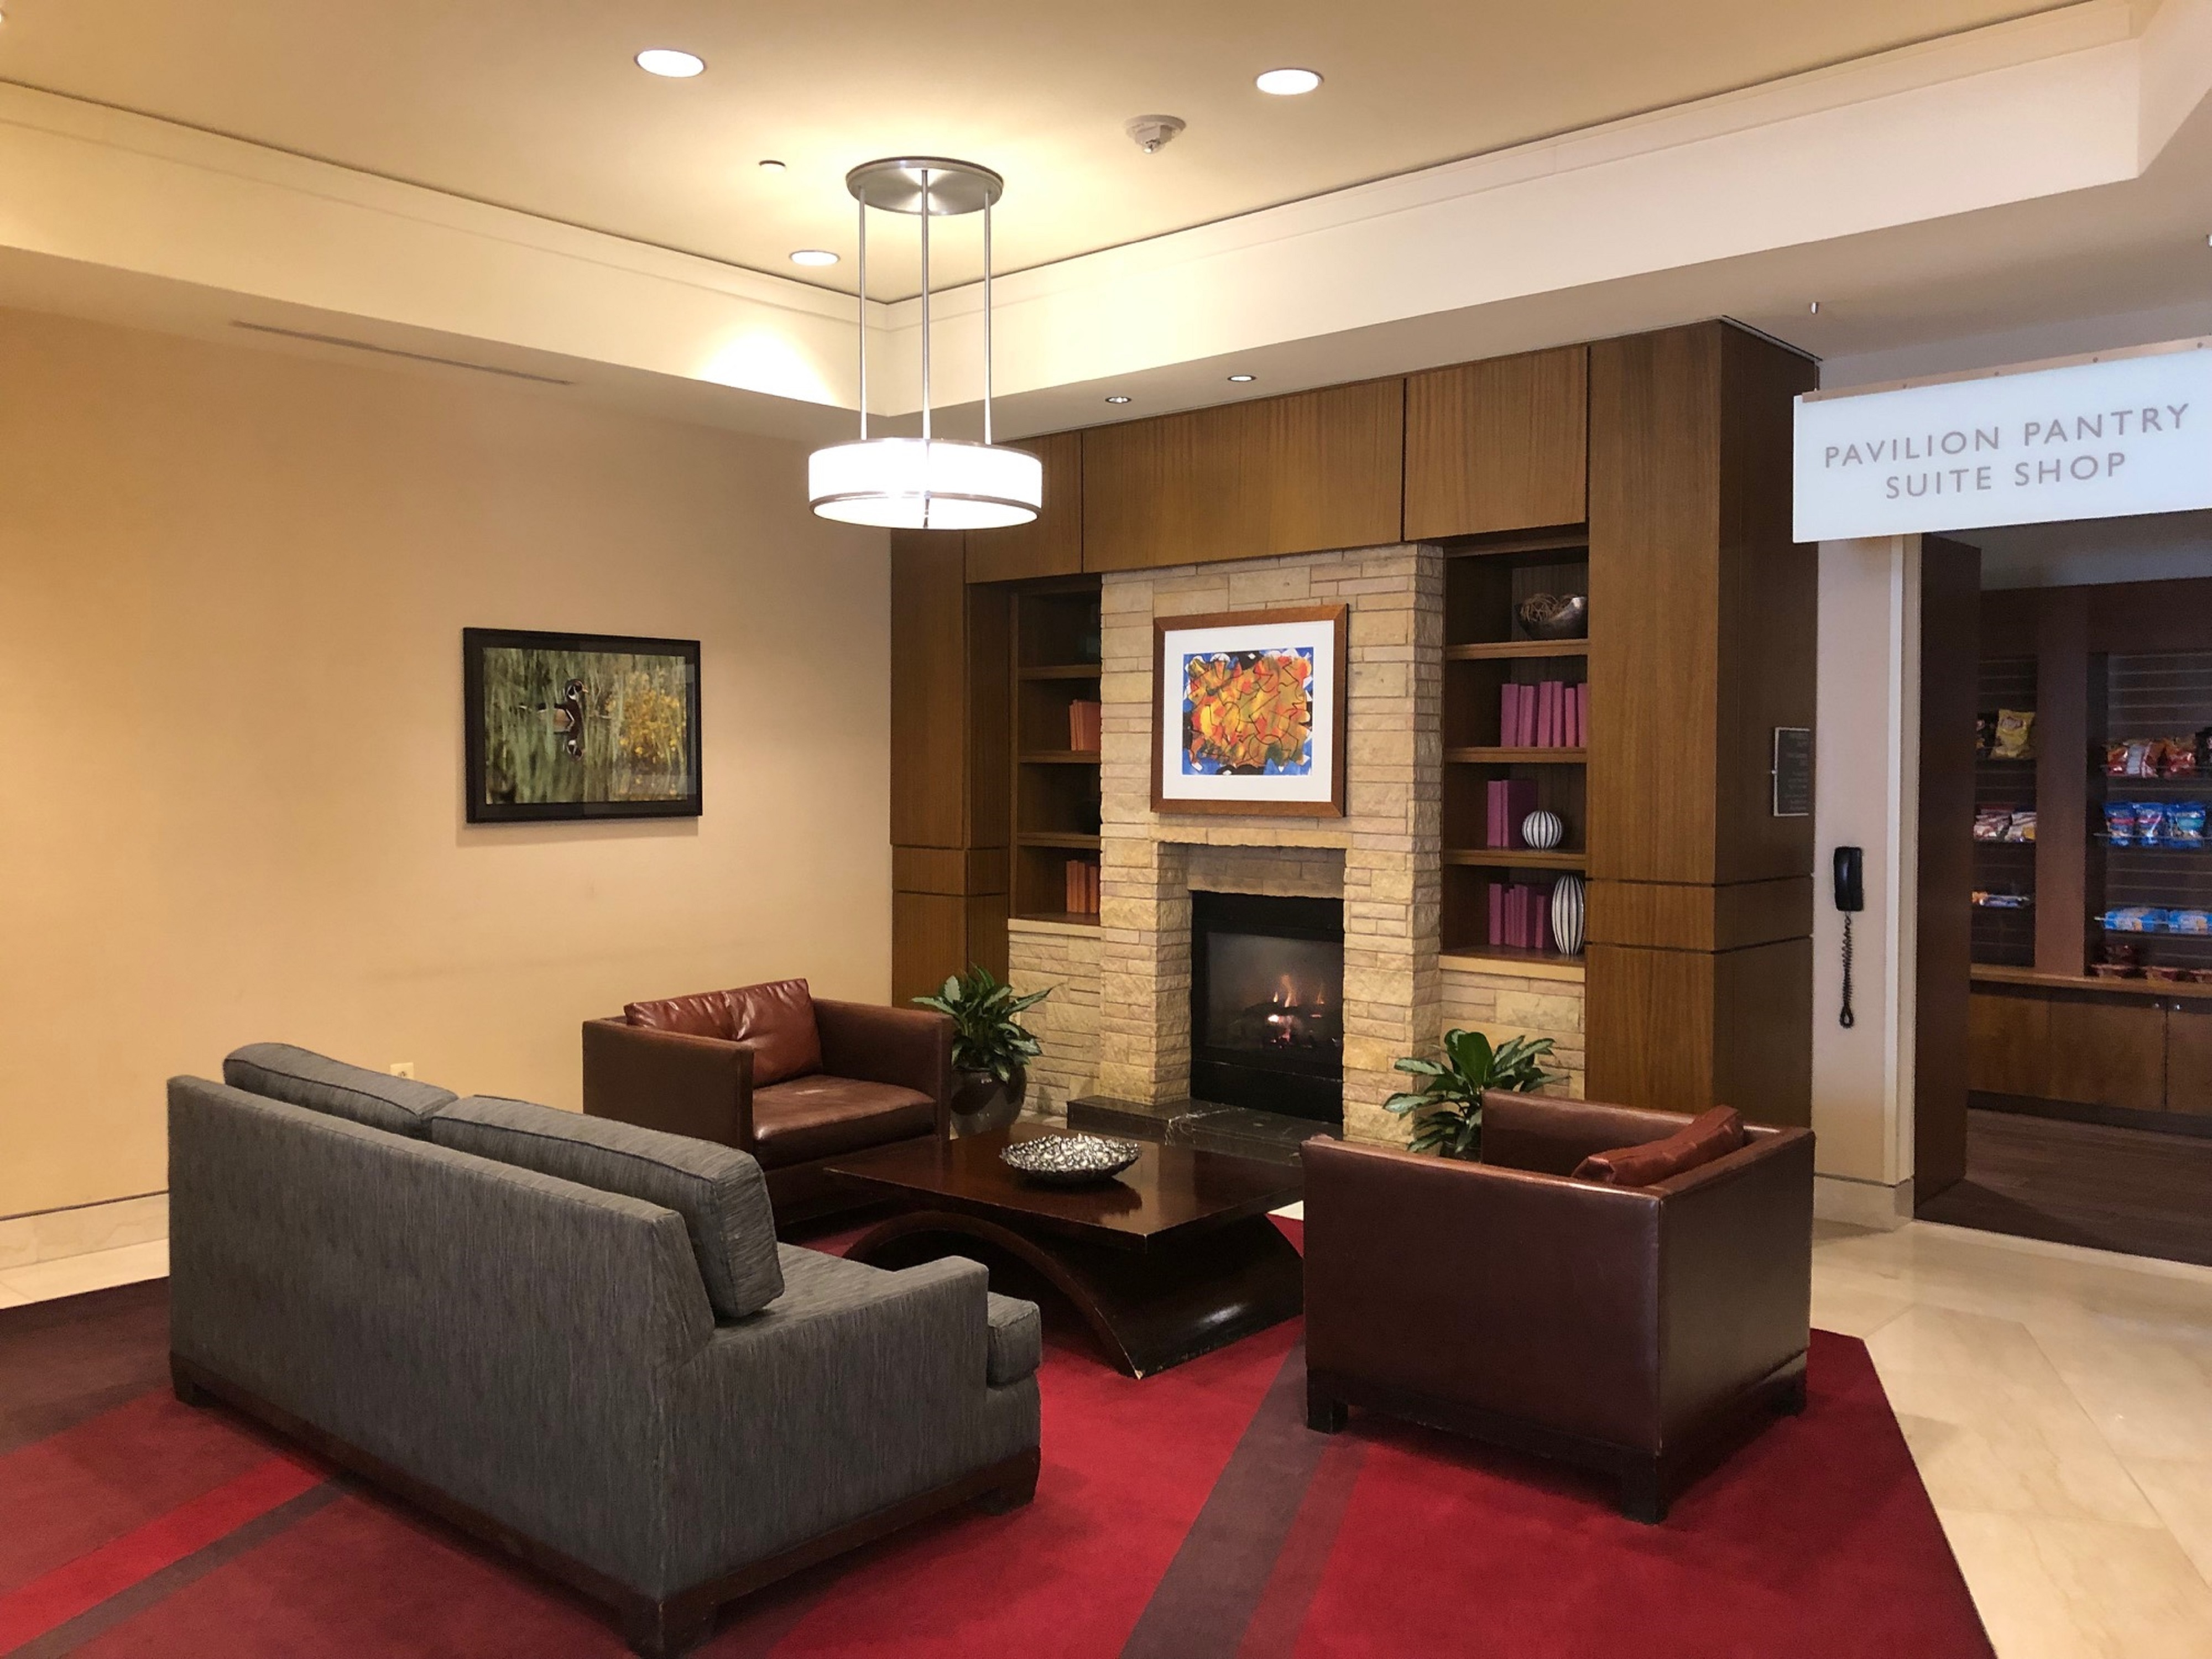 Lobby Seating Area and Fire Place